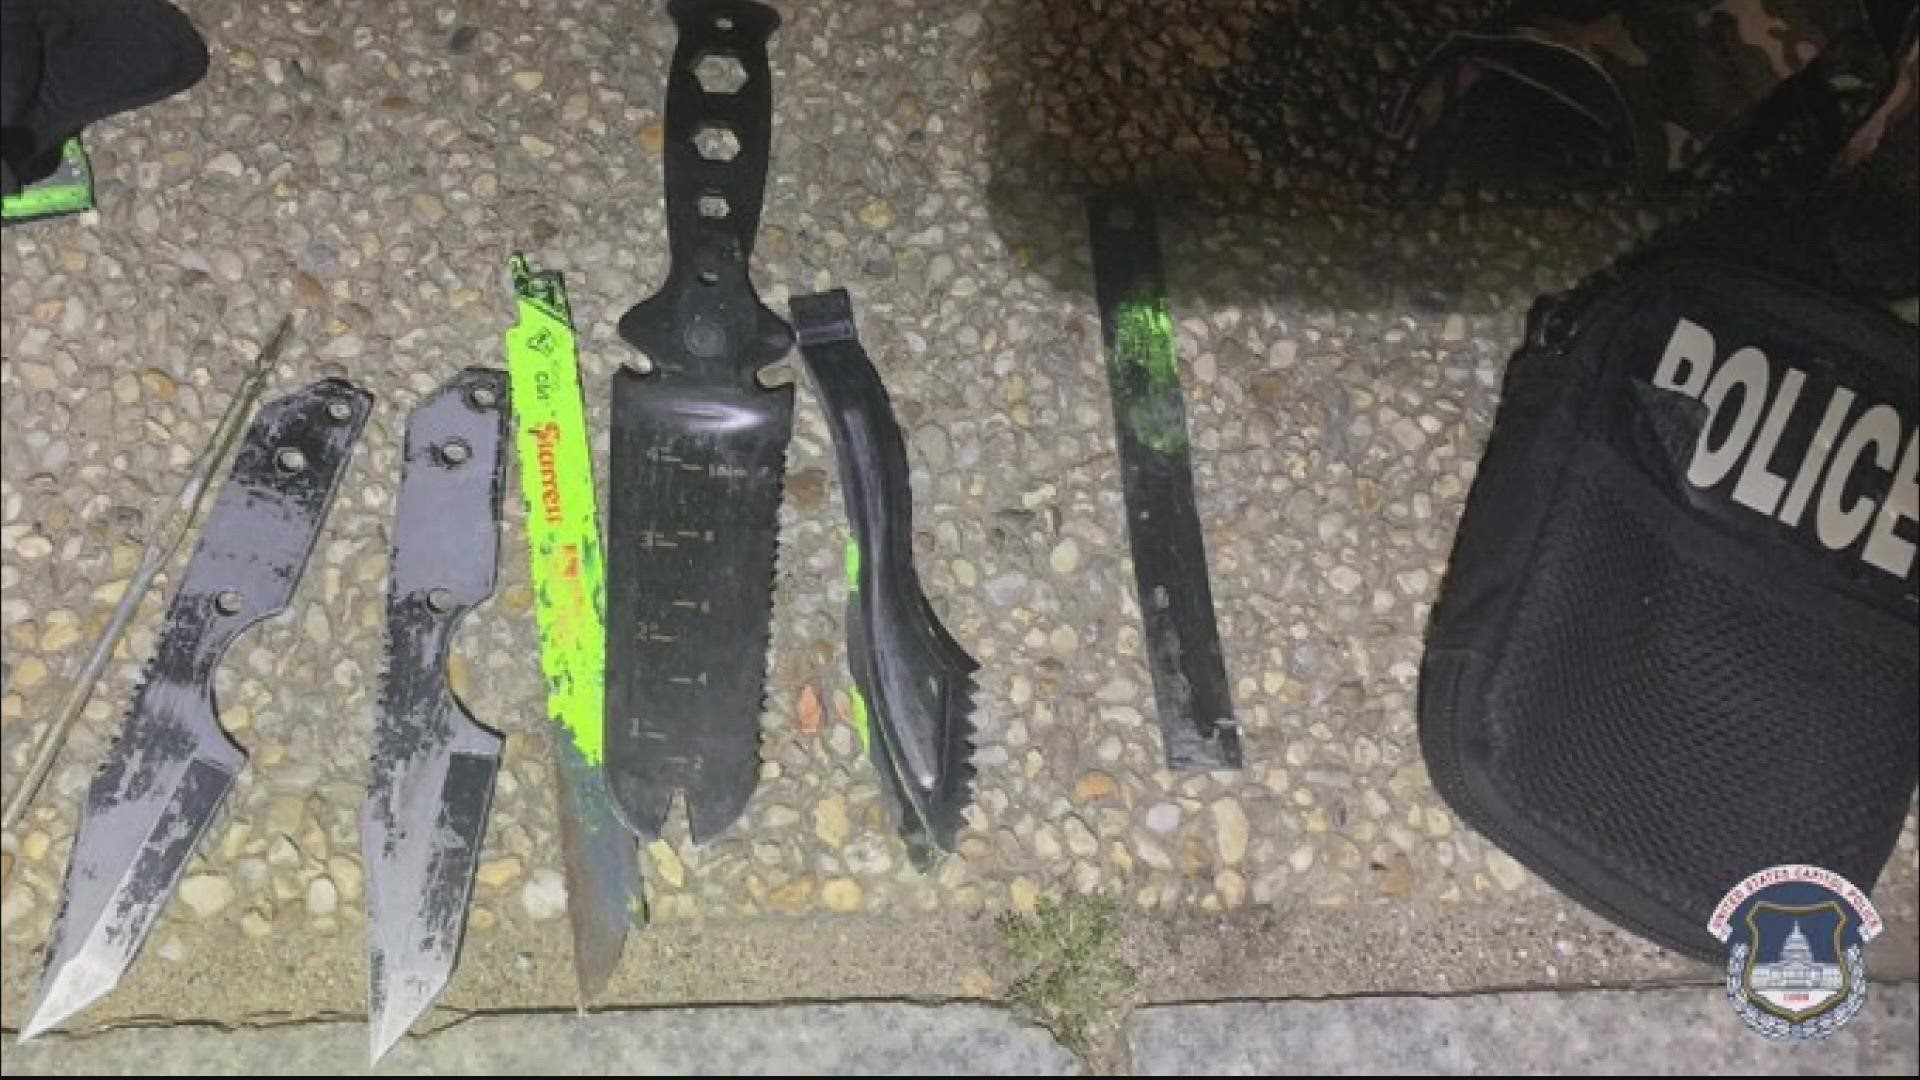 A man, suspected of impersonating a police officer, was found with a "stash of knives" Monday after the department receiving a tip from the USSS.